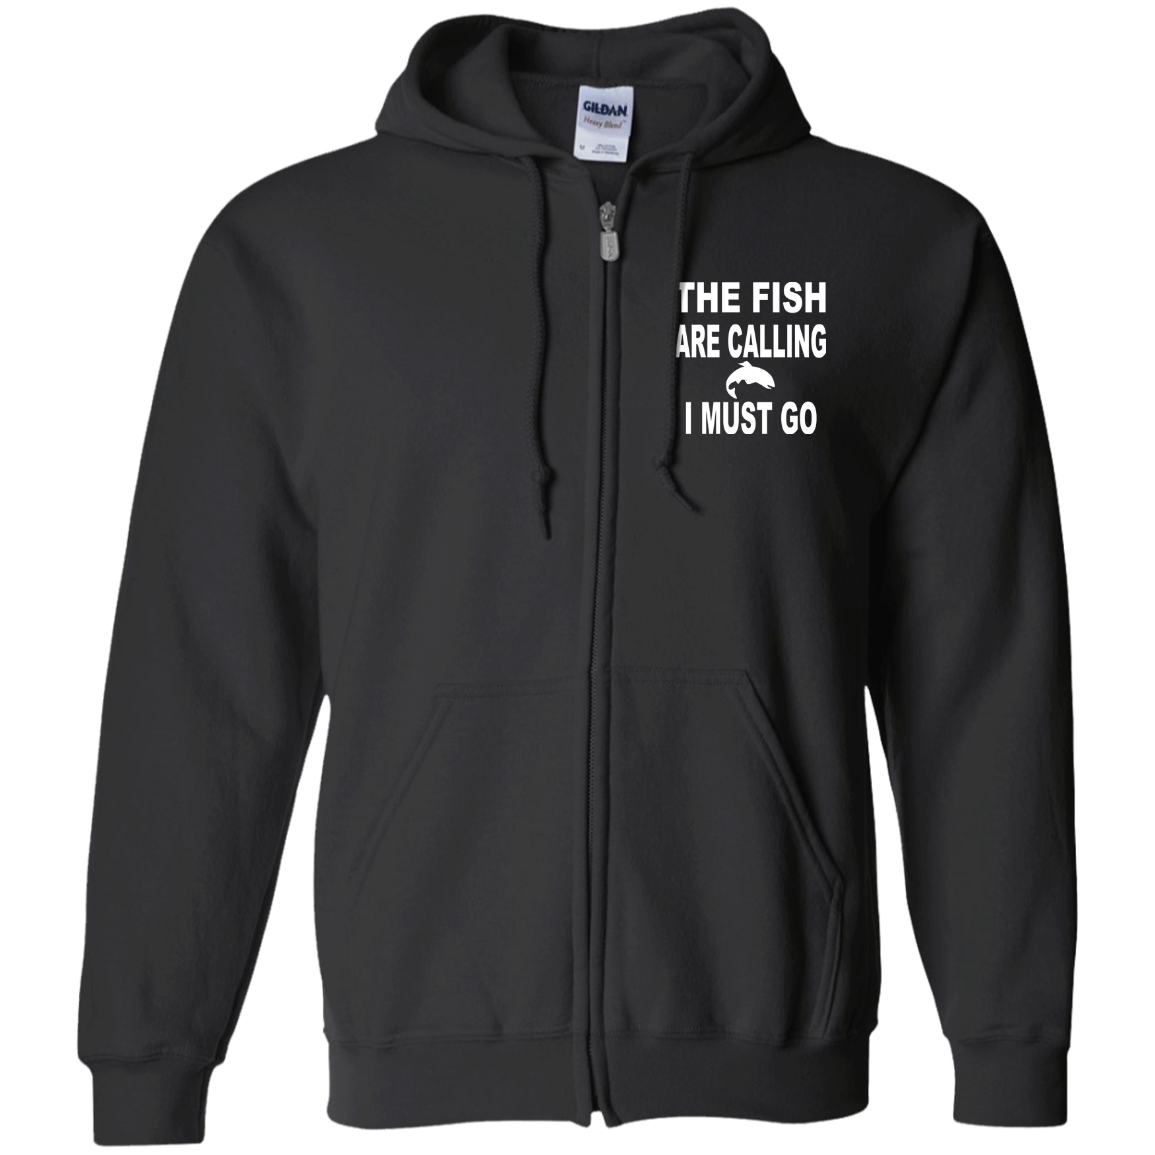 The fish are calling i must go zip up hoodie black w